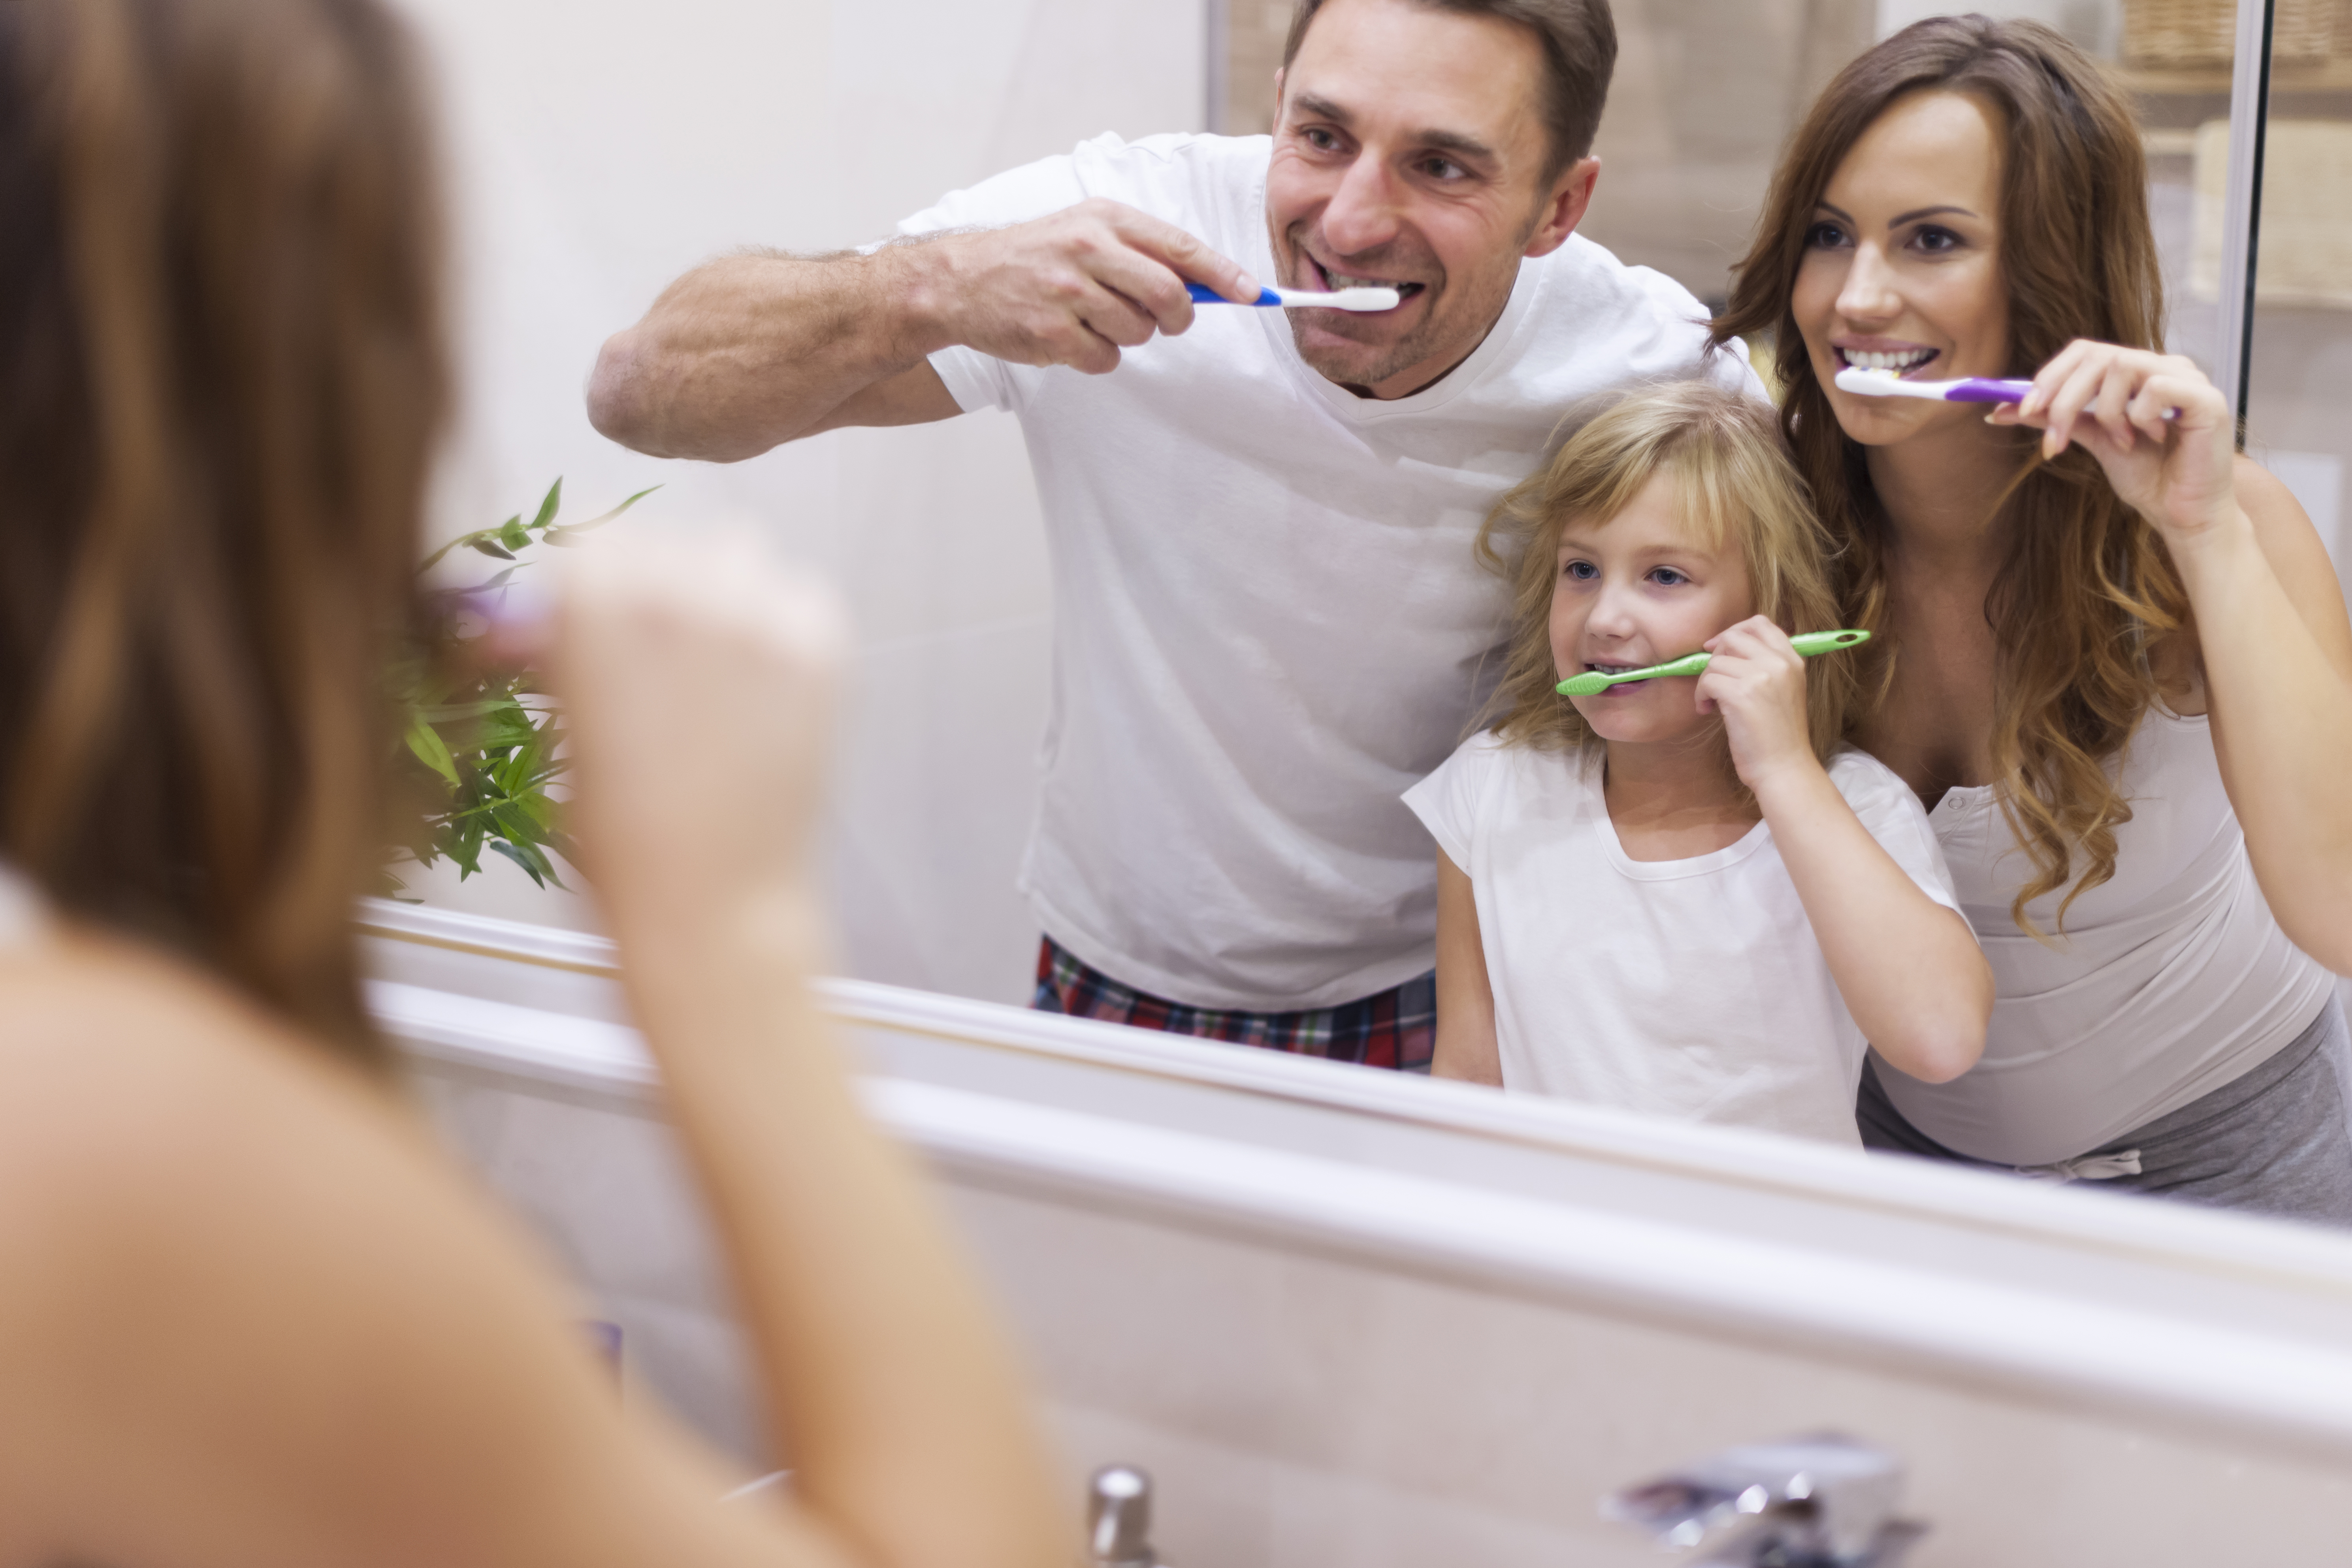 Manual toothbrushes do not remove all interdental dirt and bacteria from our mouth.